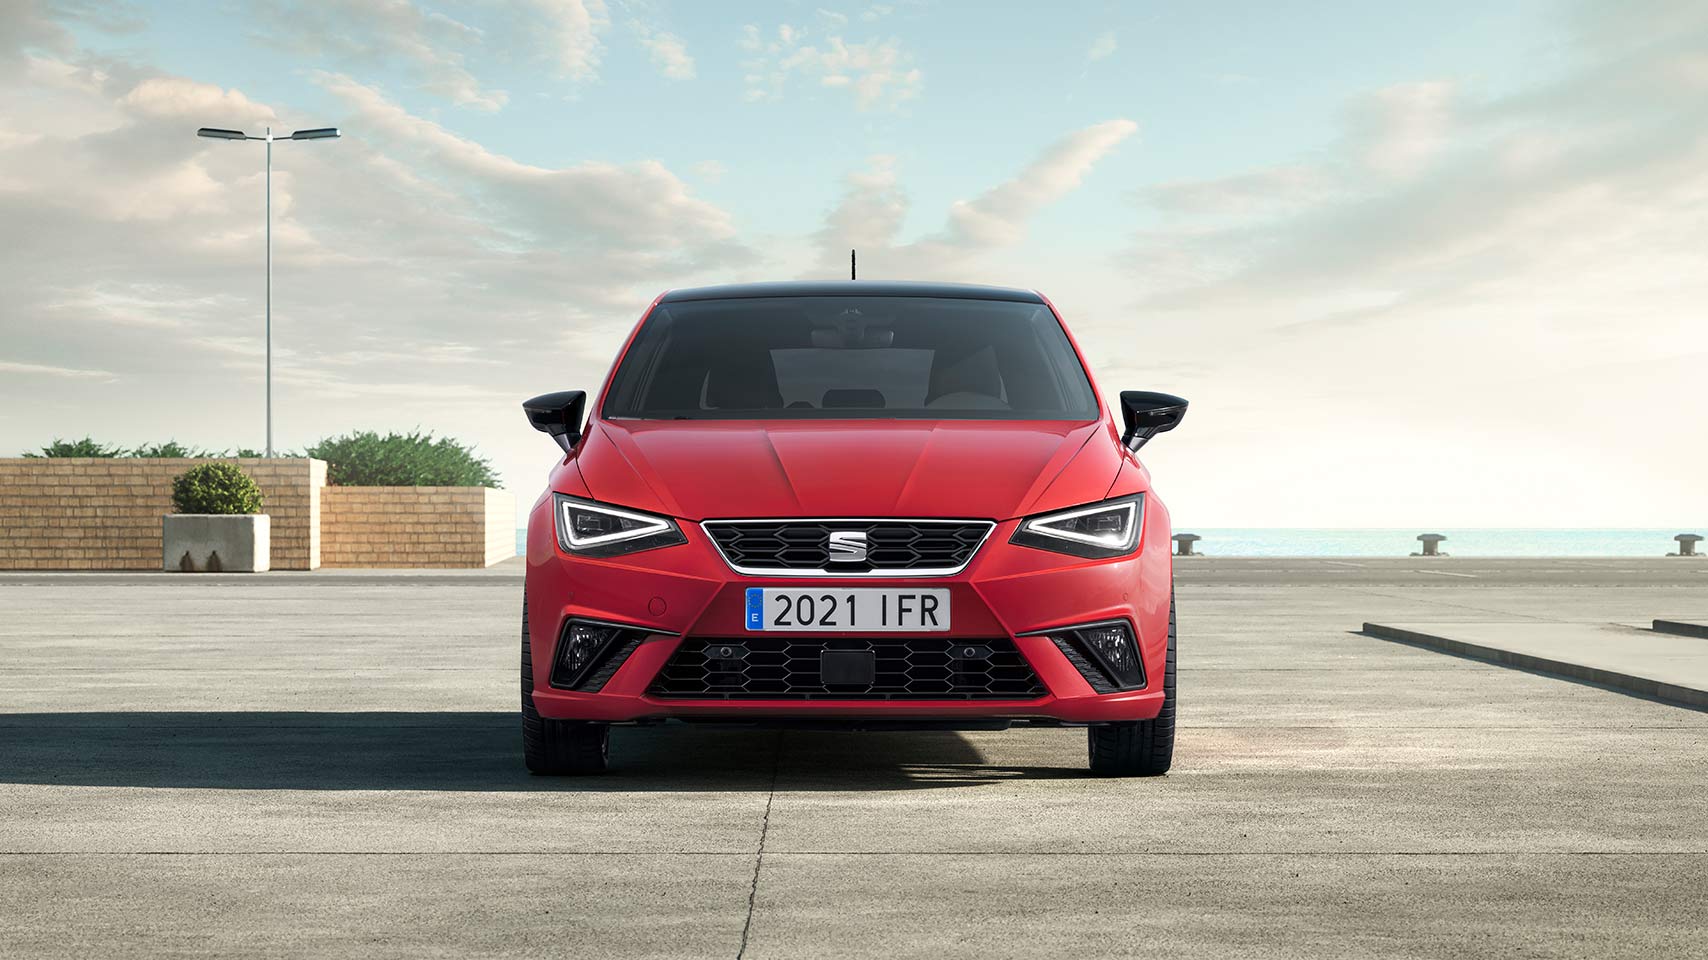 Seat Ibiza hatchback updated for 2021